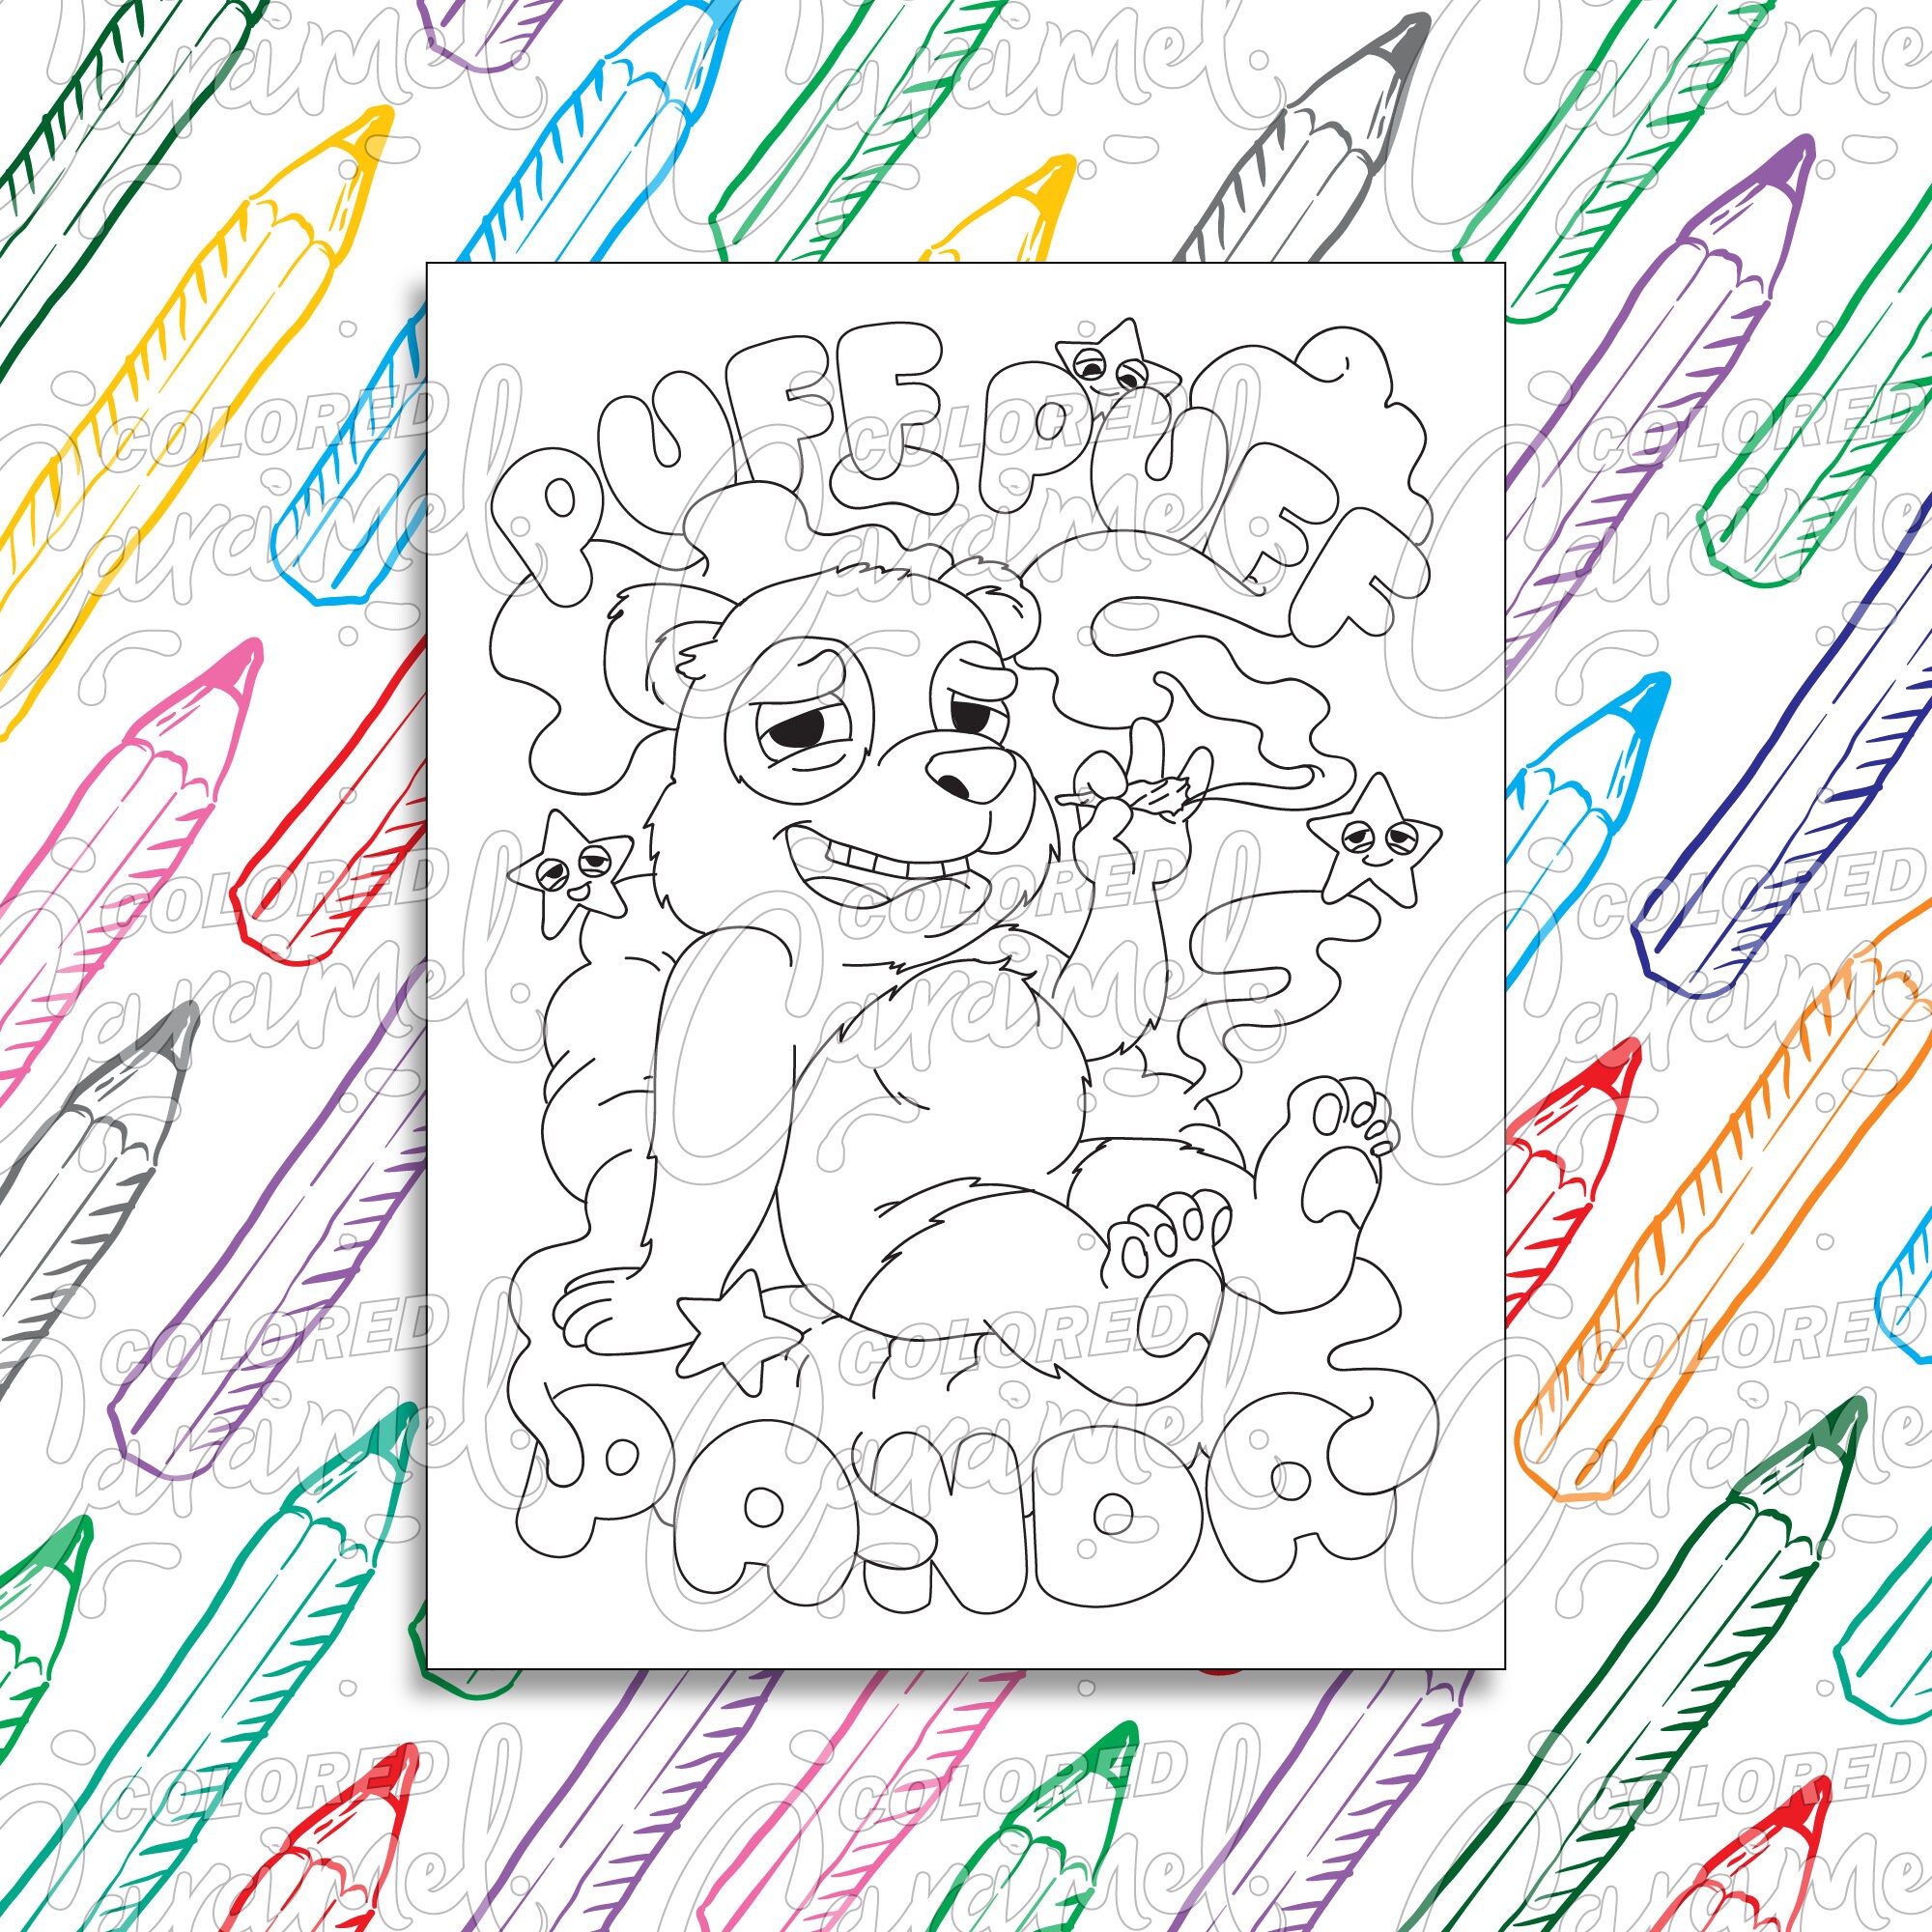 Stoner Coloring Page Digital Download PDF, Trippy, Funny and Cool Bear Smoking Weed, Printable Psychedelic Drawing & Illustration